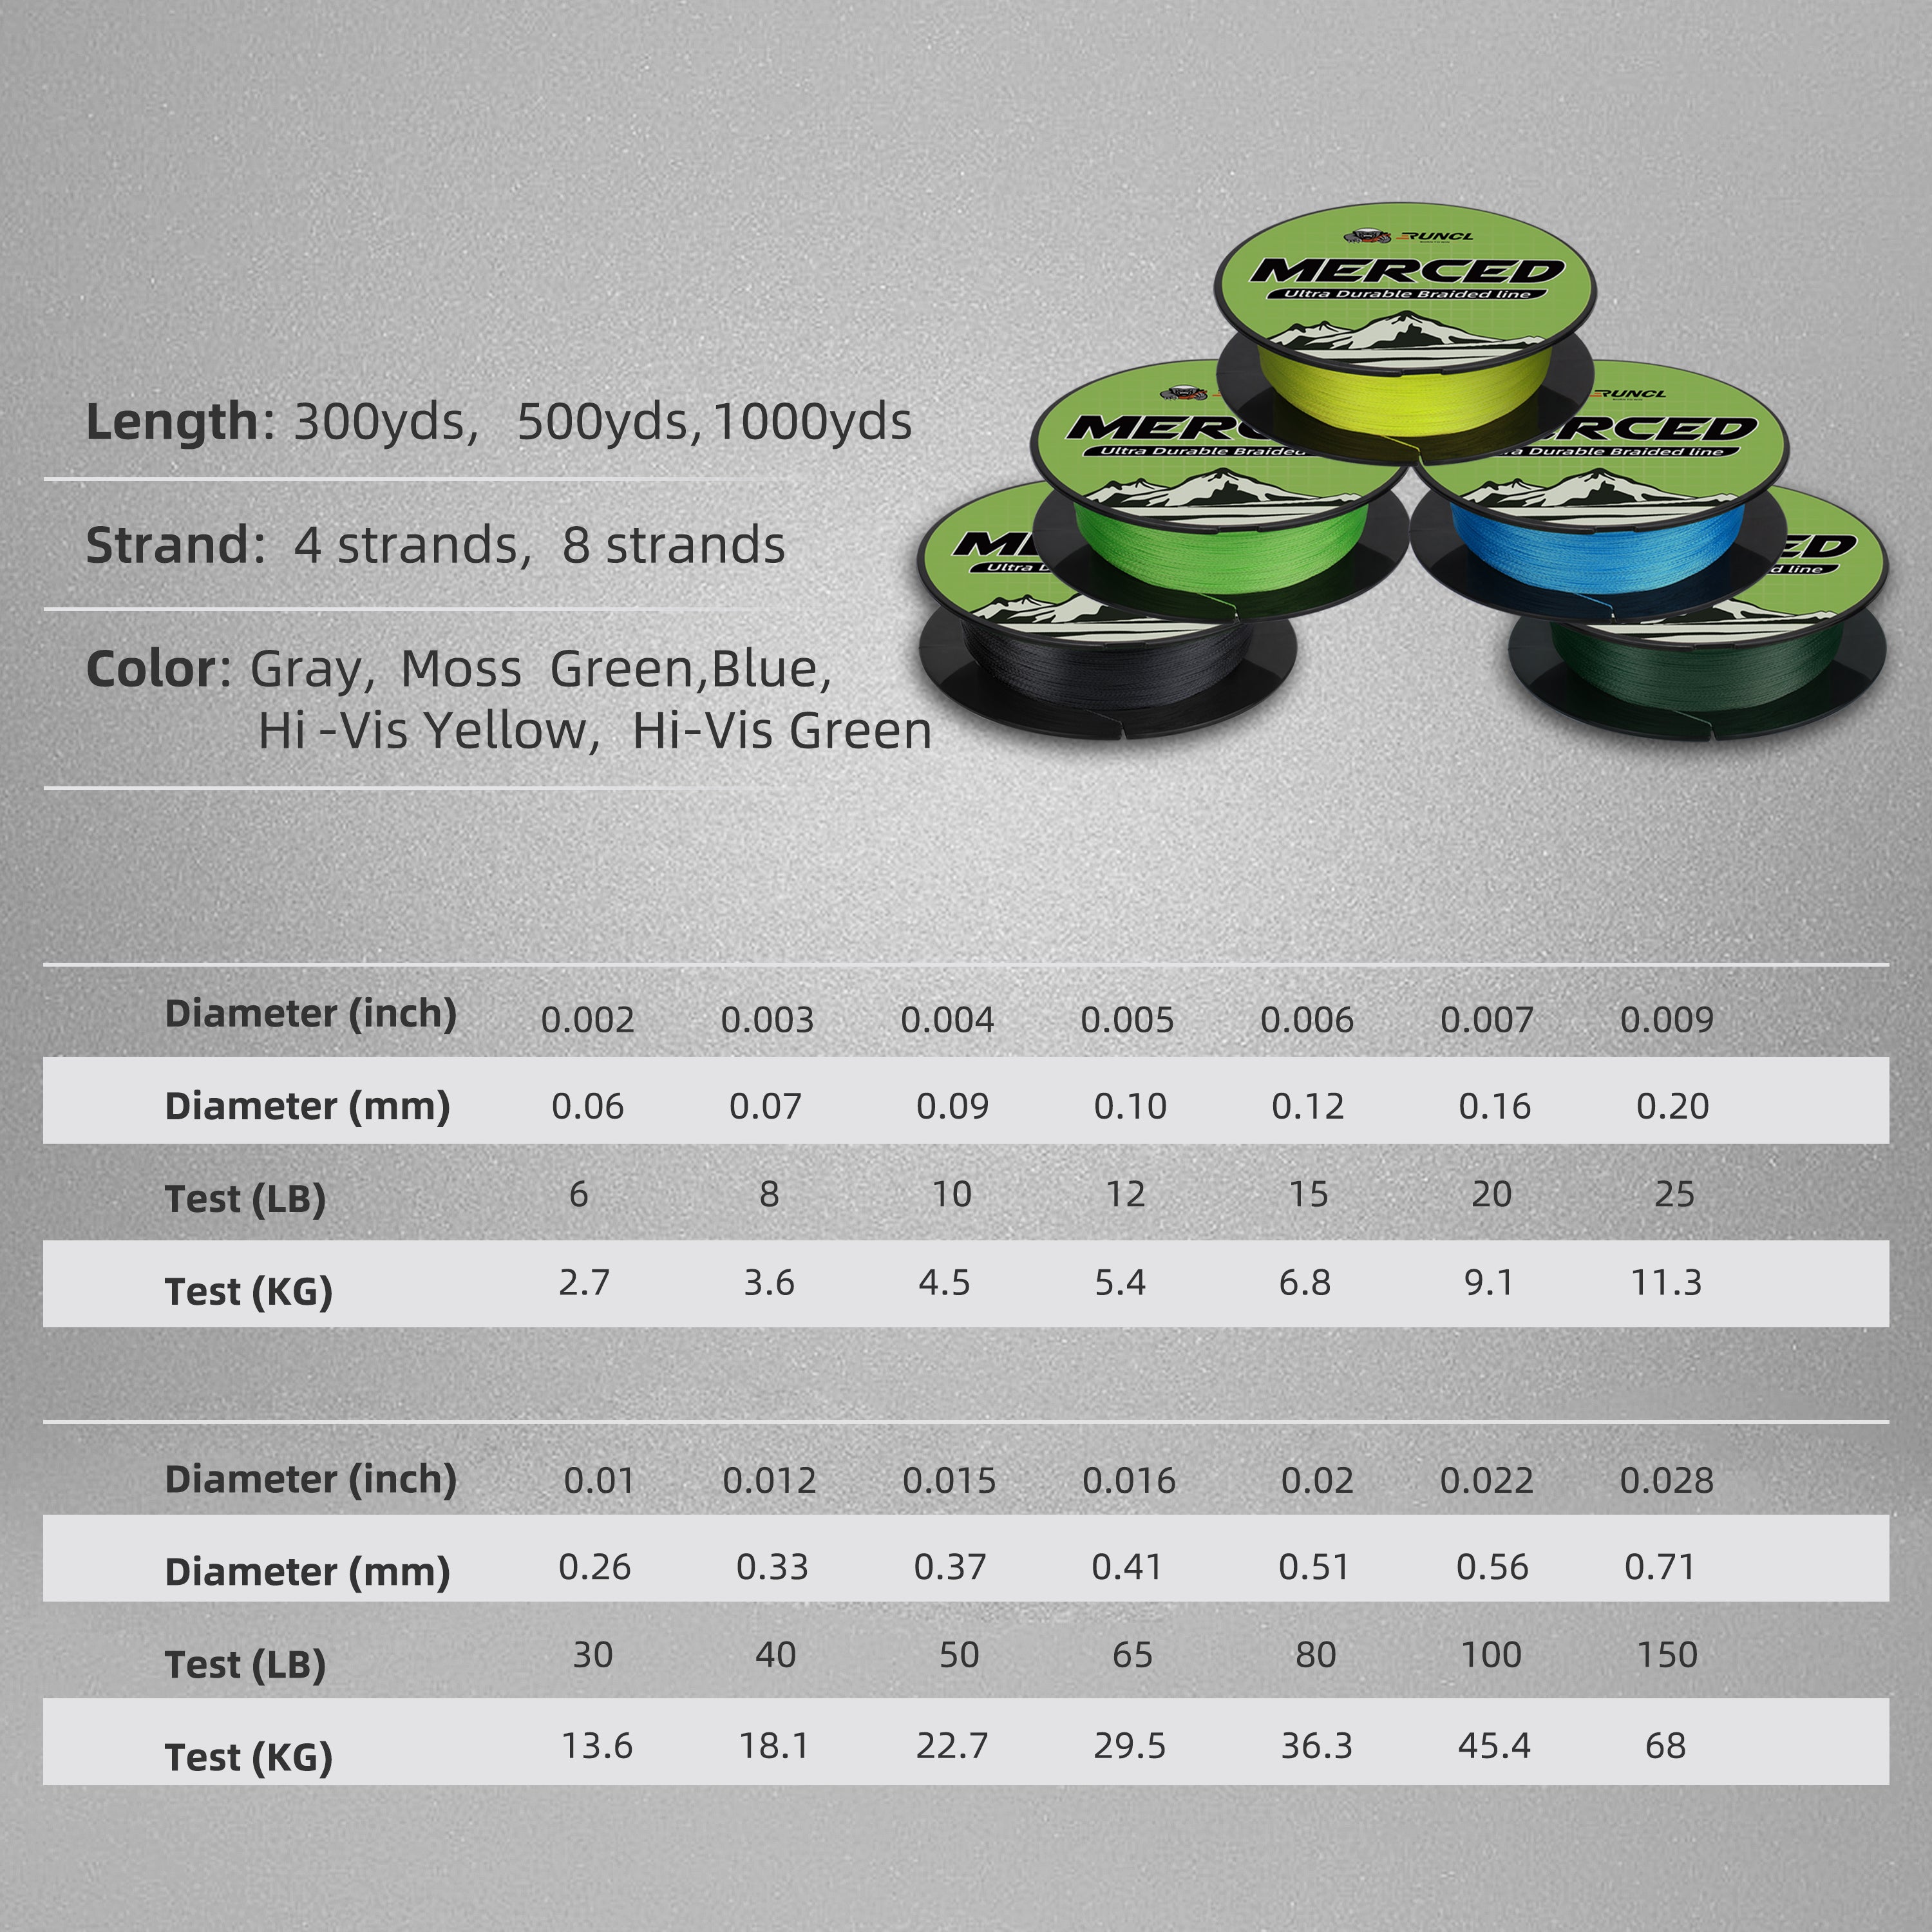 Runcl Braided Fishing Line Merced, 8 Strands Braided Line - Proprietary  Weaving Tech, Thin-Coating Tech, Stronger, Smoother - Fi